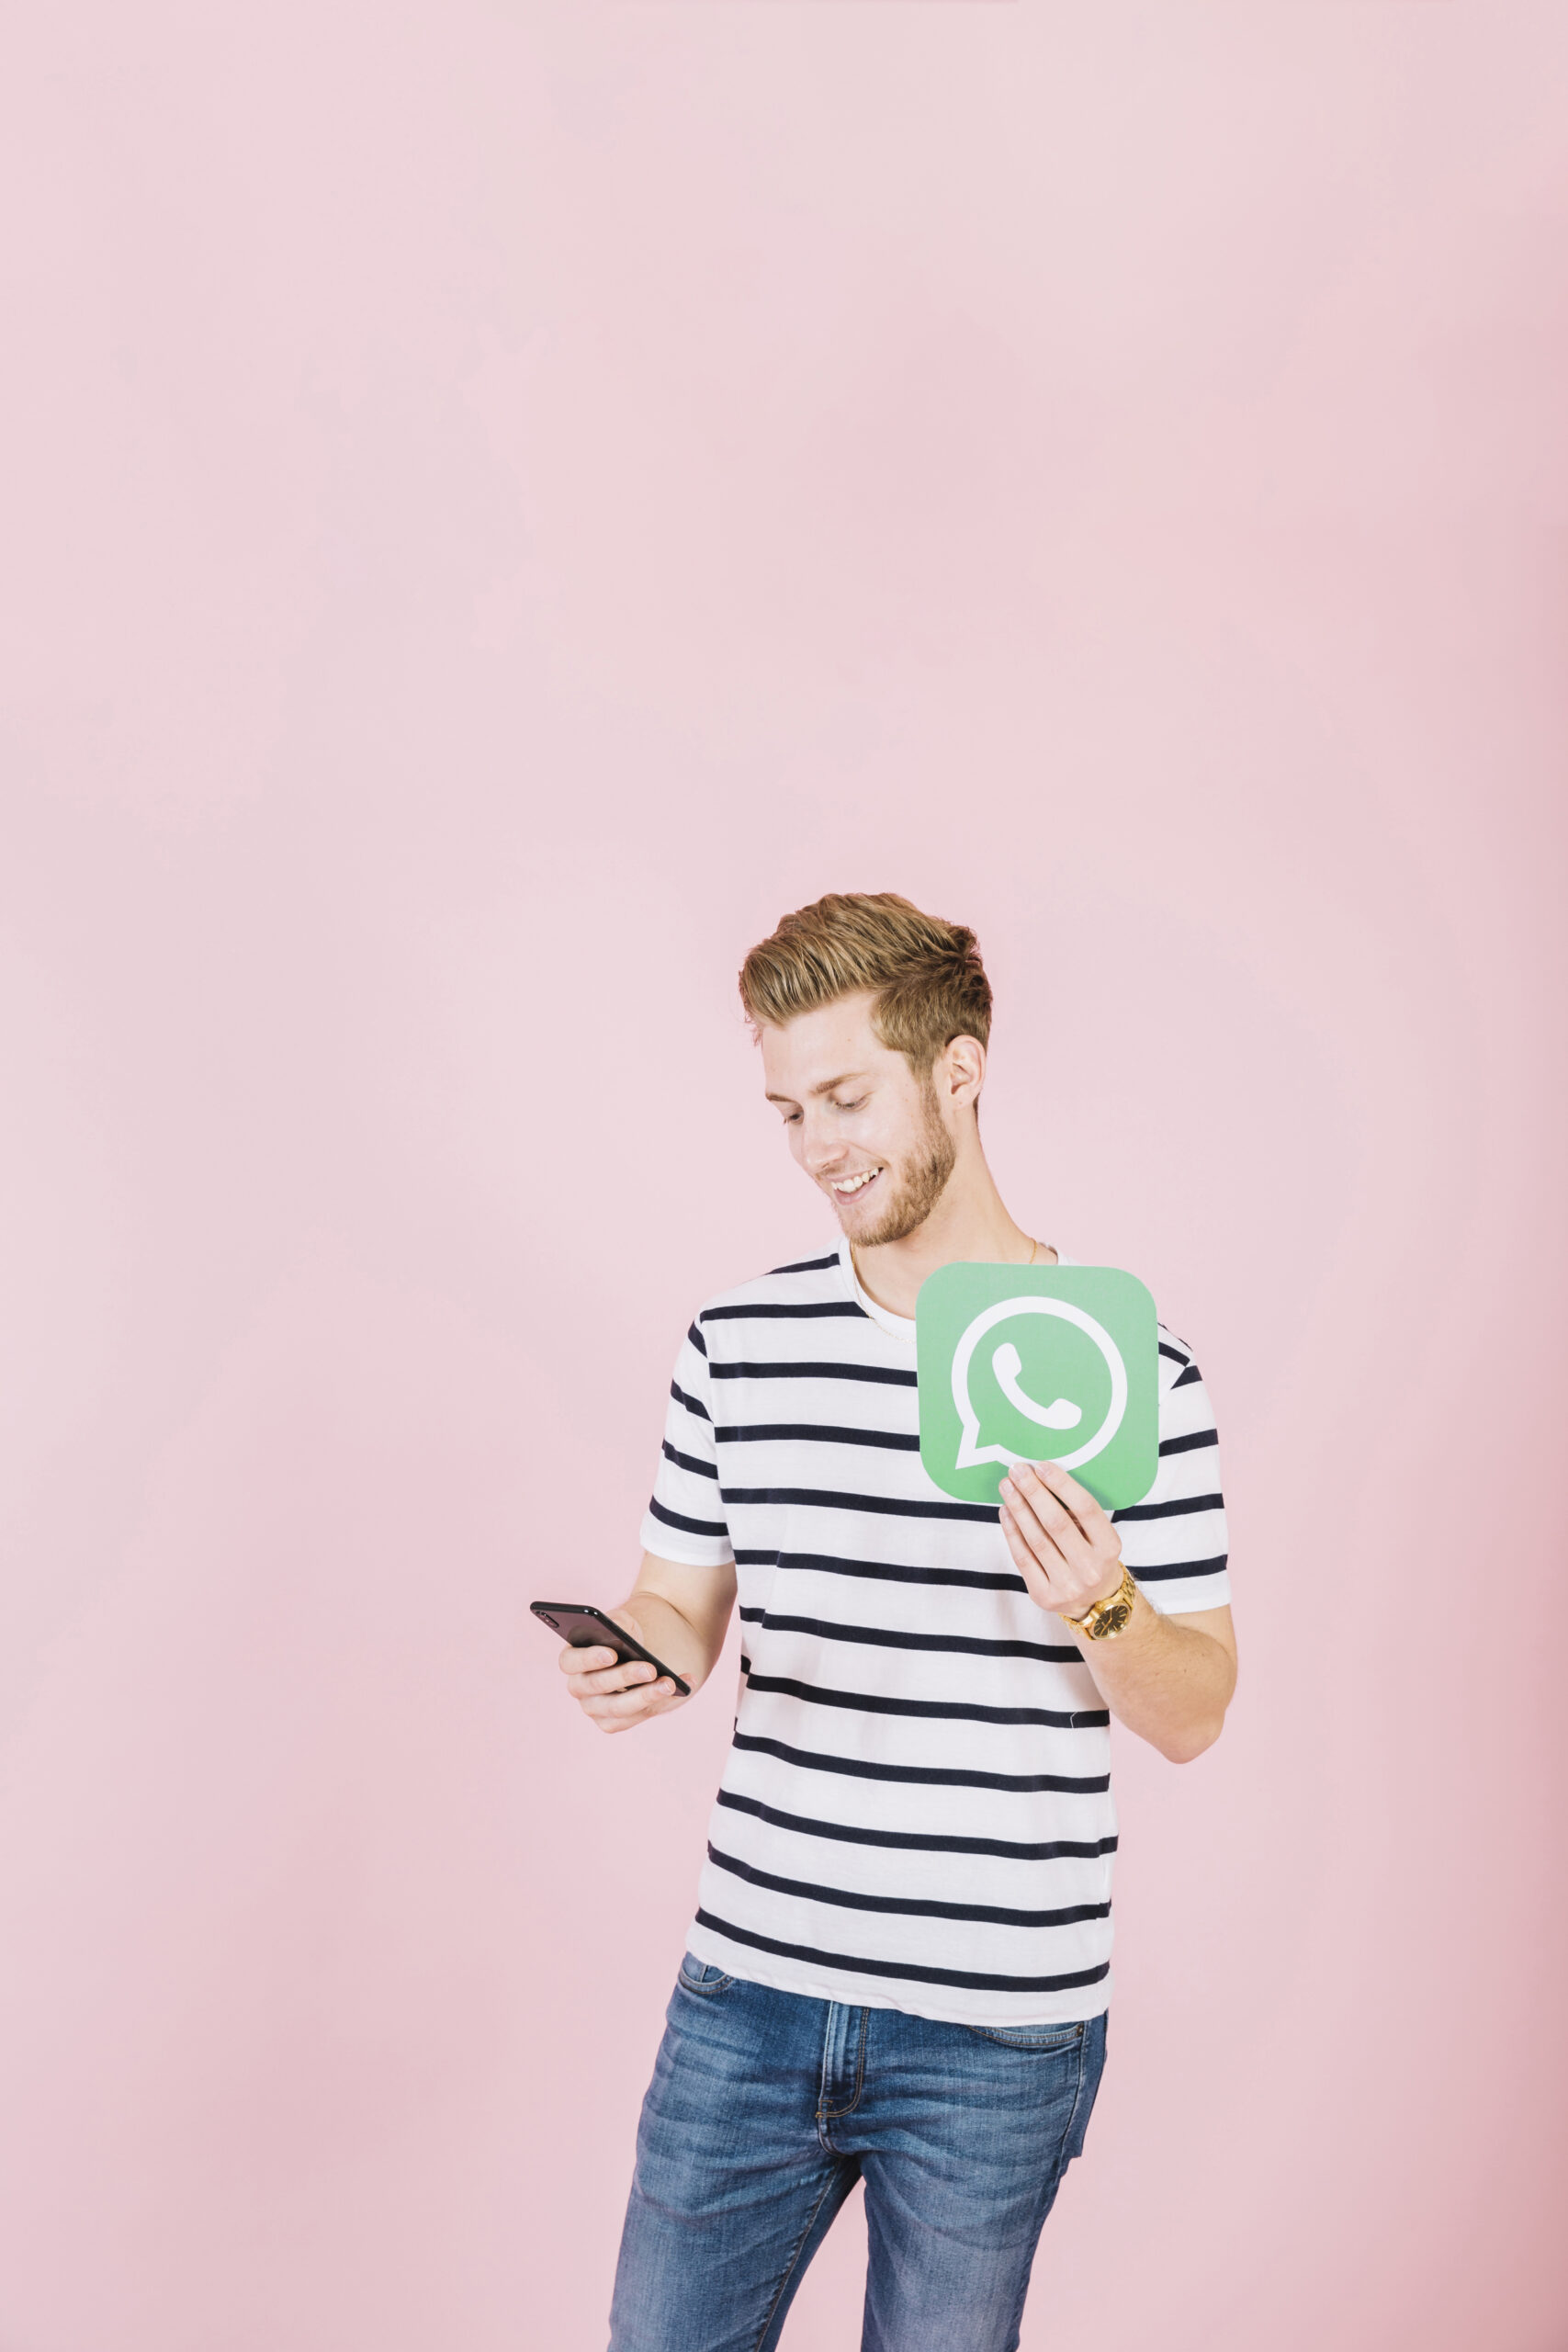 Strategies for WhatsApp Broadcast Messages